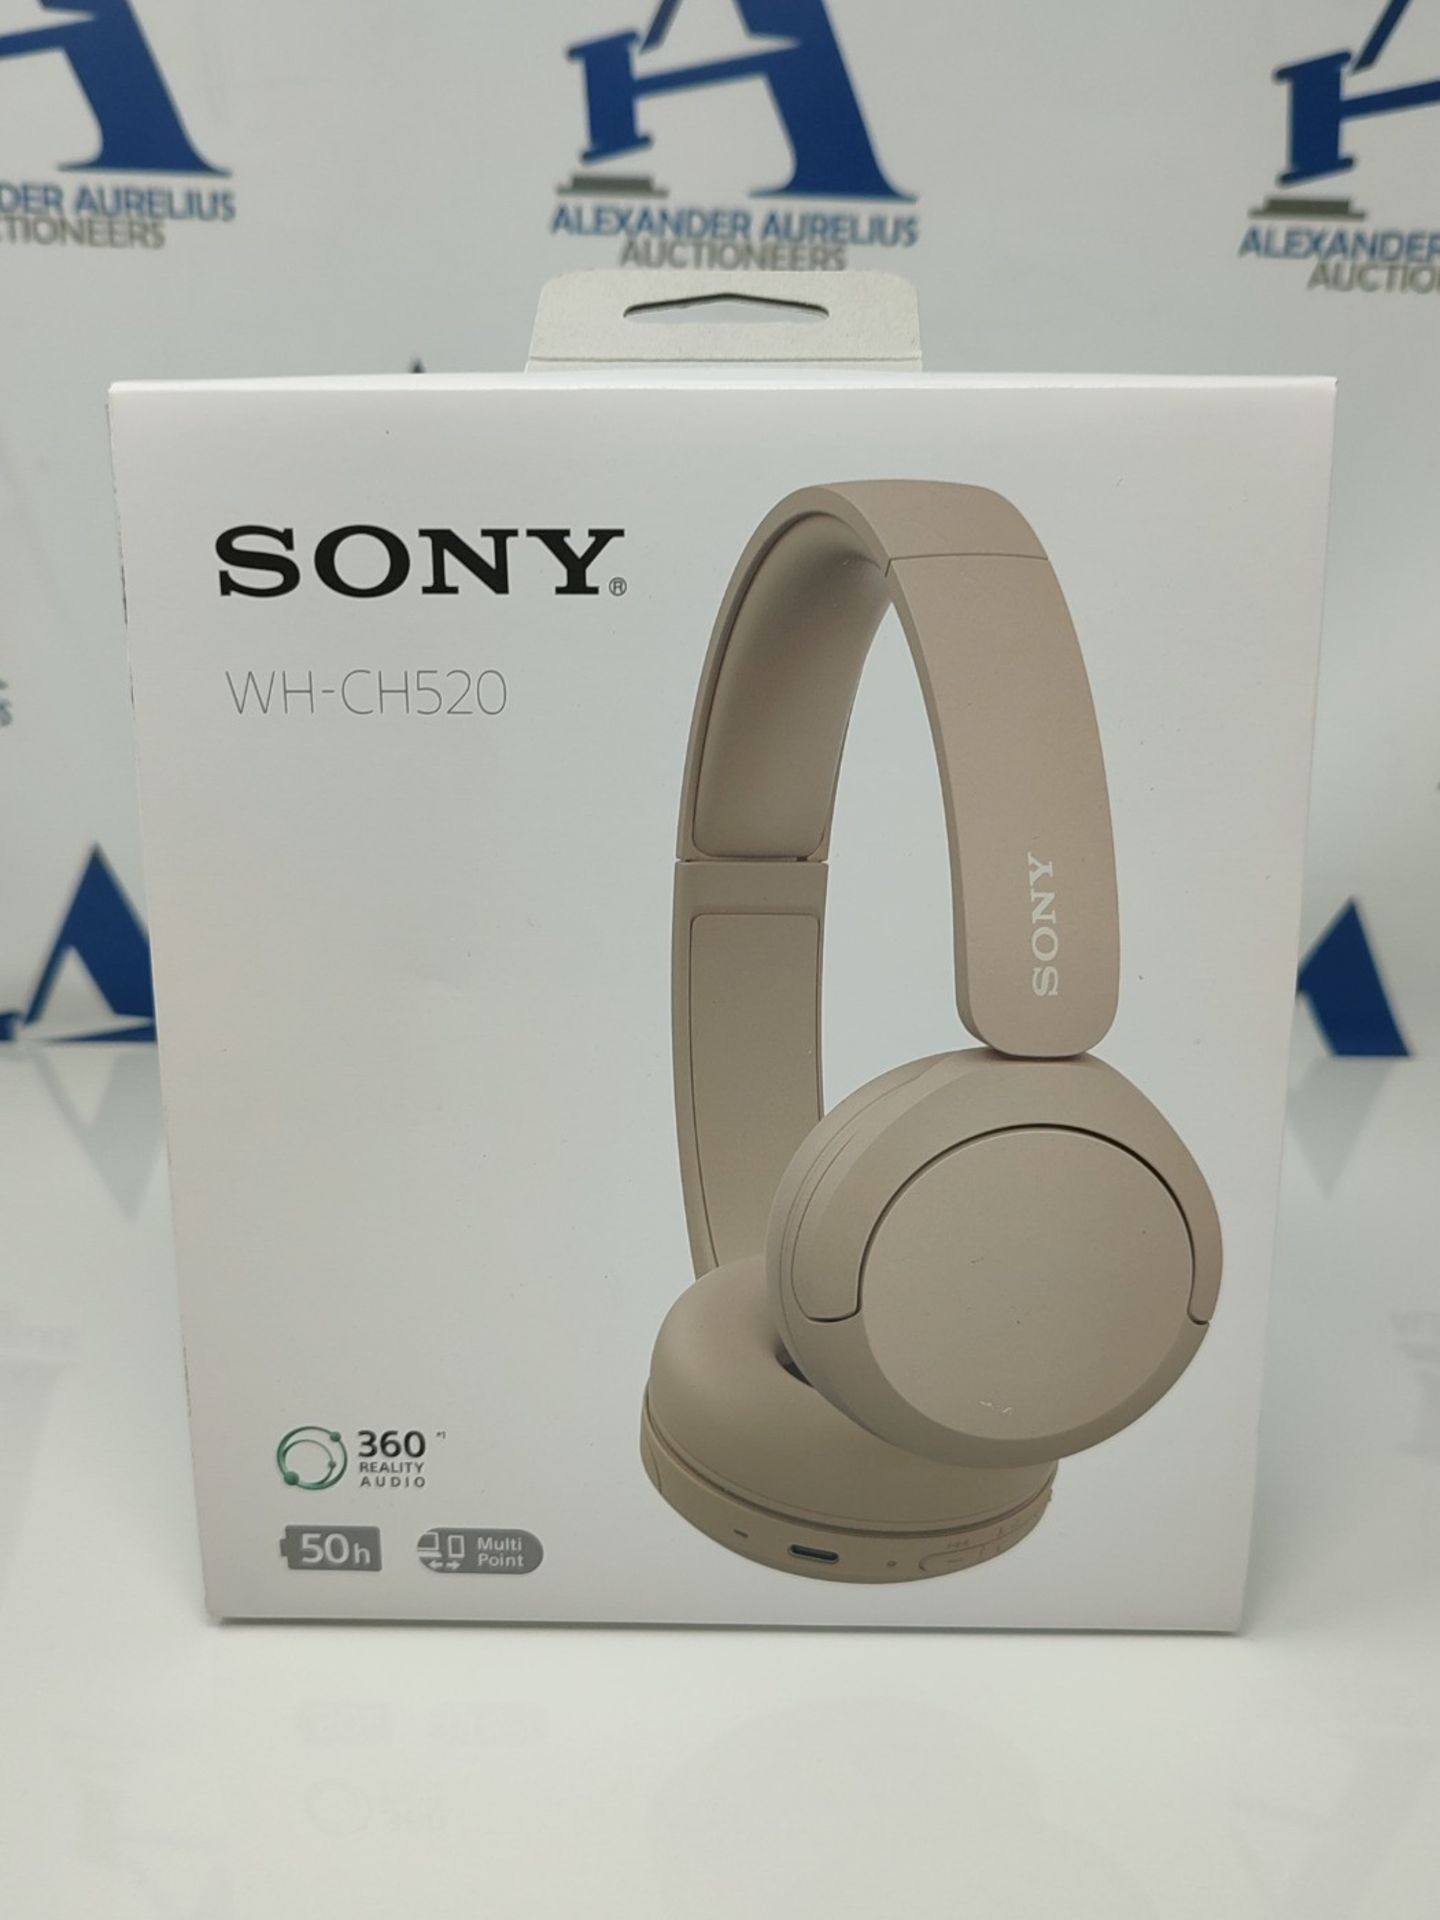 Sony WH-CH520 | Wireless Headphones, Multipoint Connection, with Microphone, Up to 50 - Image 2 of 3